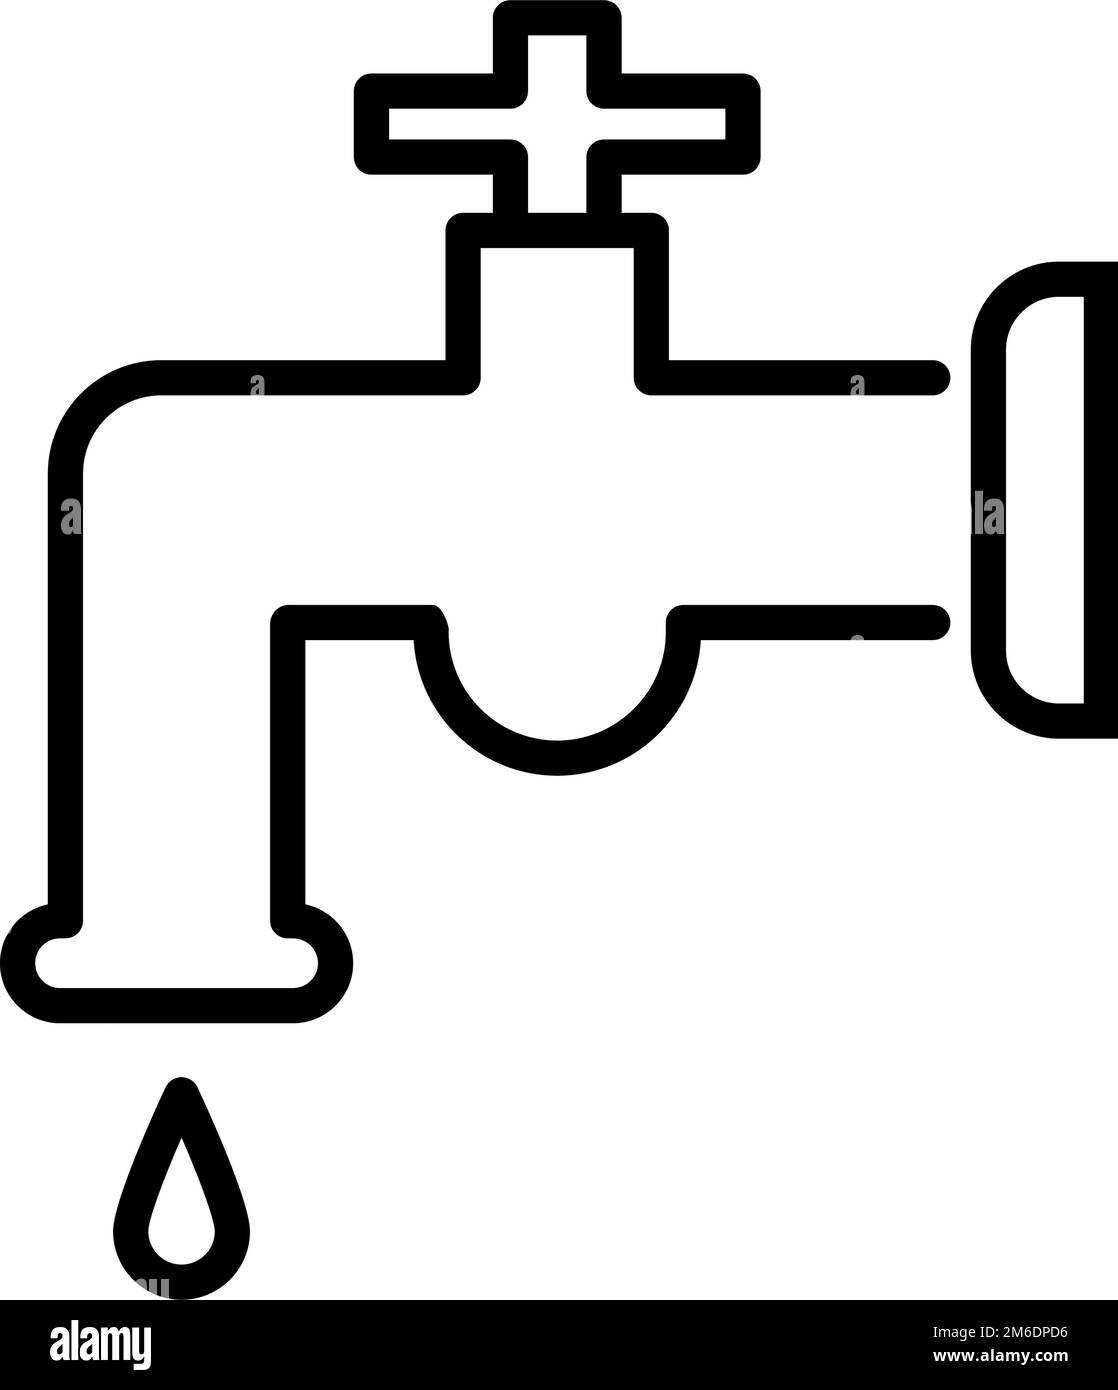 Simple water tap icon. Faucet and water drop. Editable vector. Stock Vector